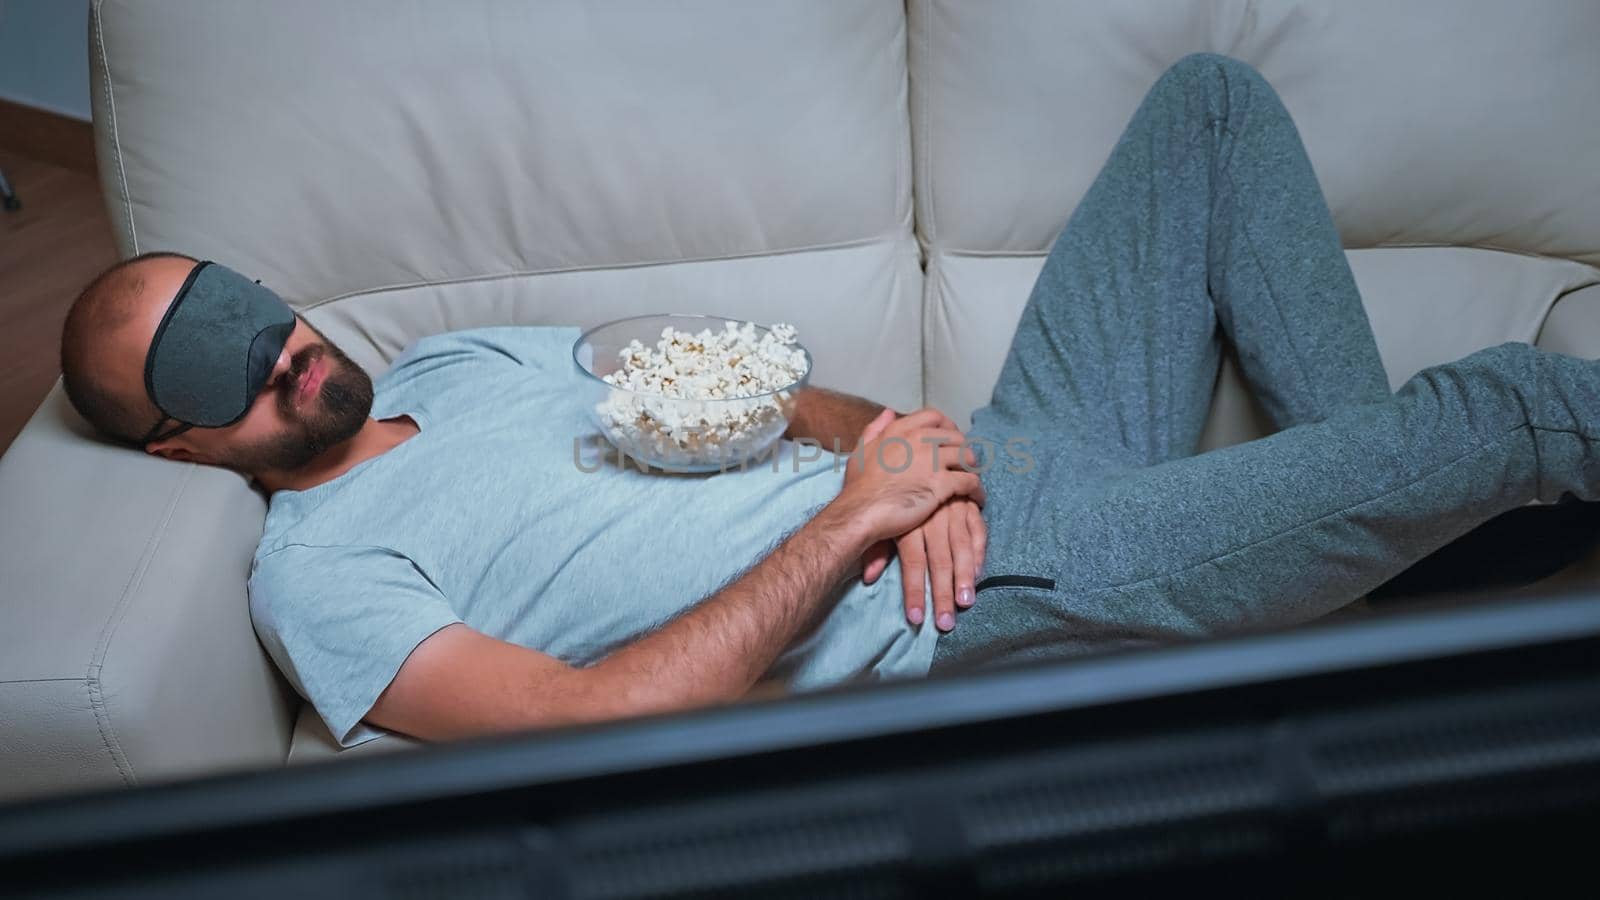 Caucasian male falling asleep while watching movie show sitting on couch by DCStudio